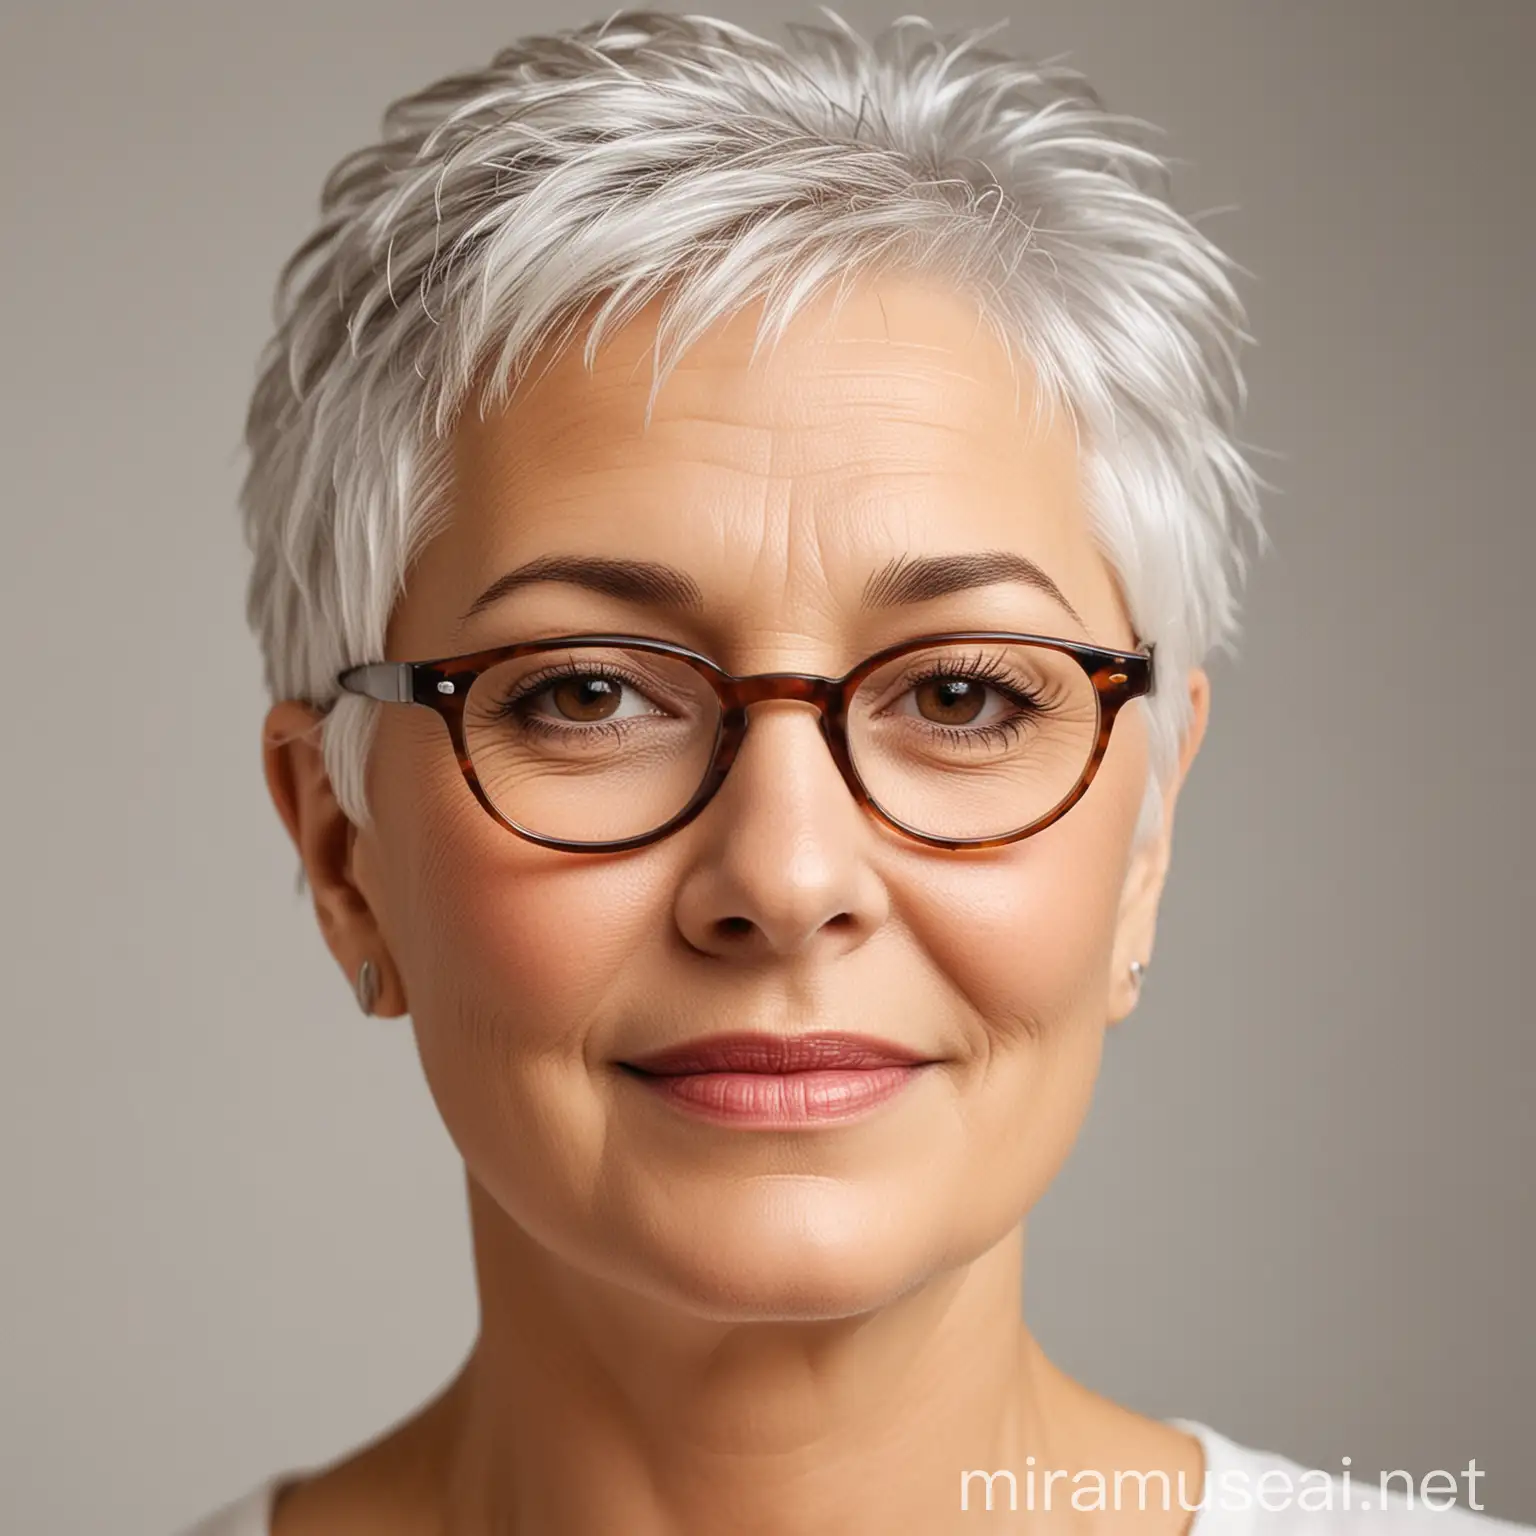 Elegant WhiteHaired Lady with Light Brown Glasses